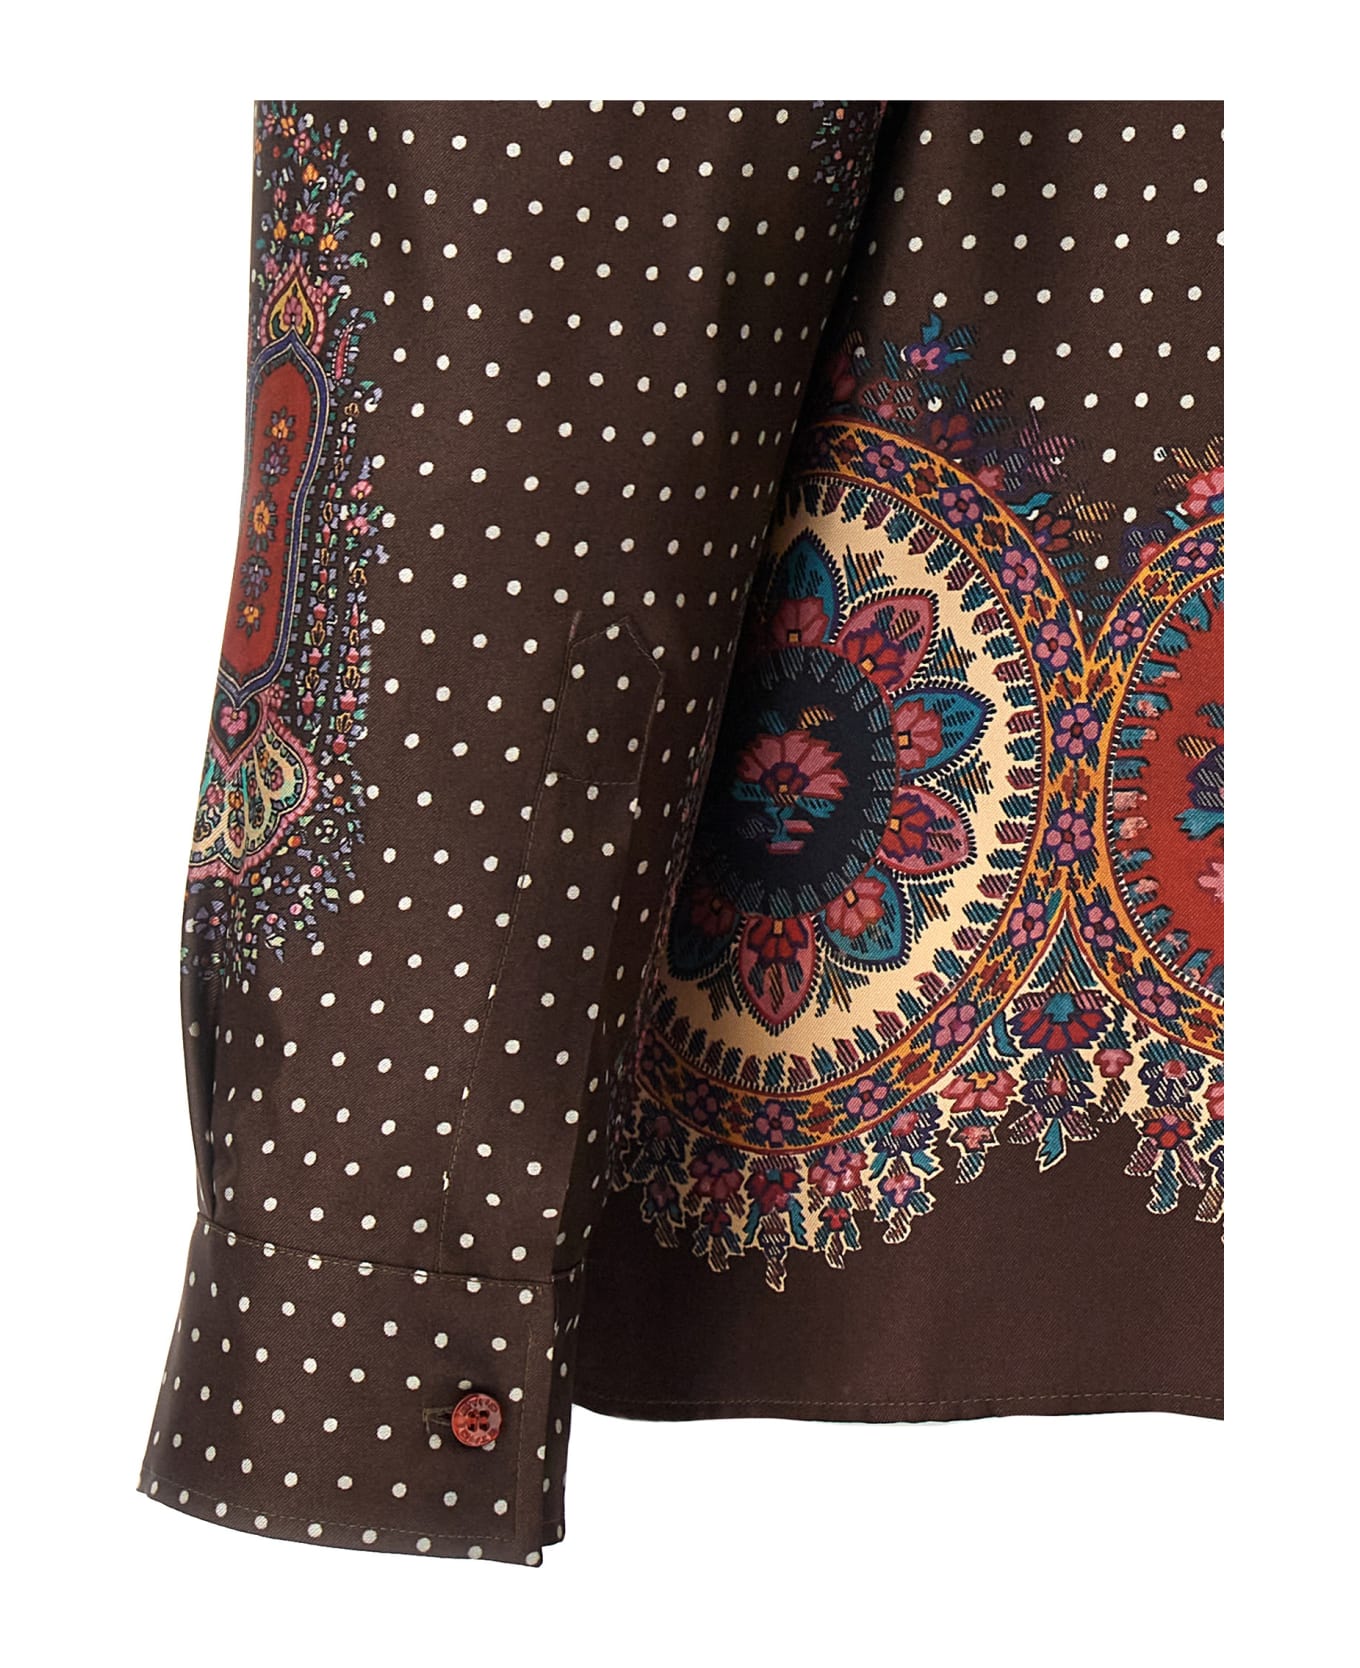 Etro All Over Print Shirt - Brown